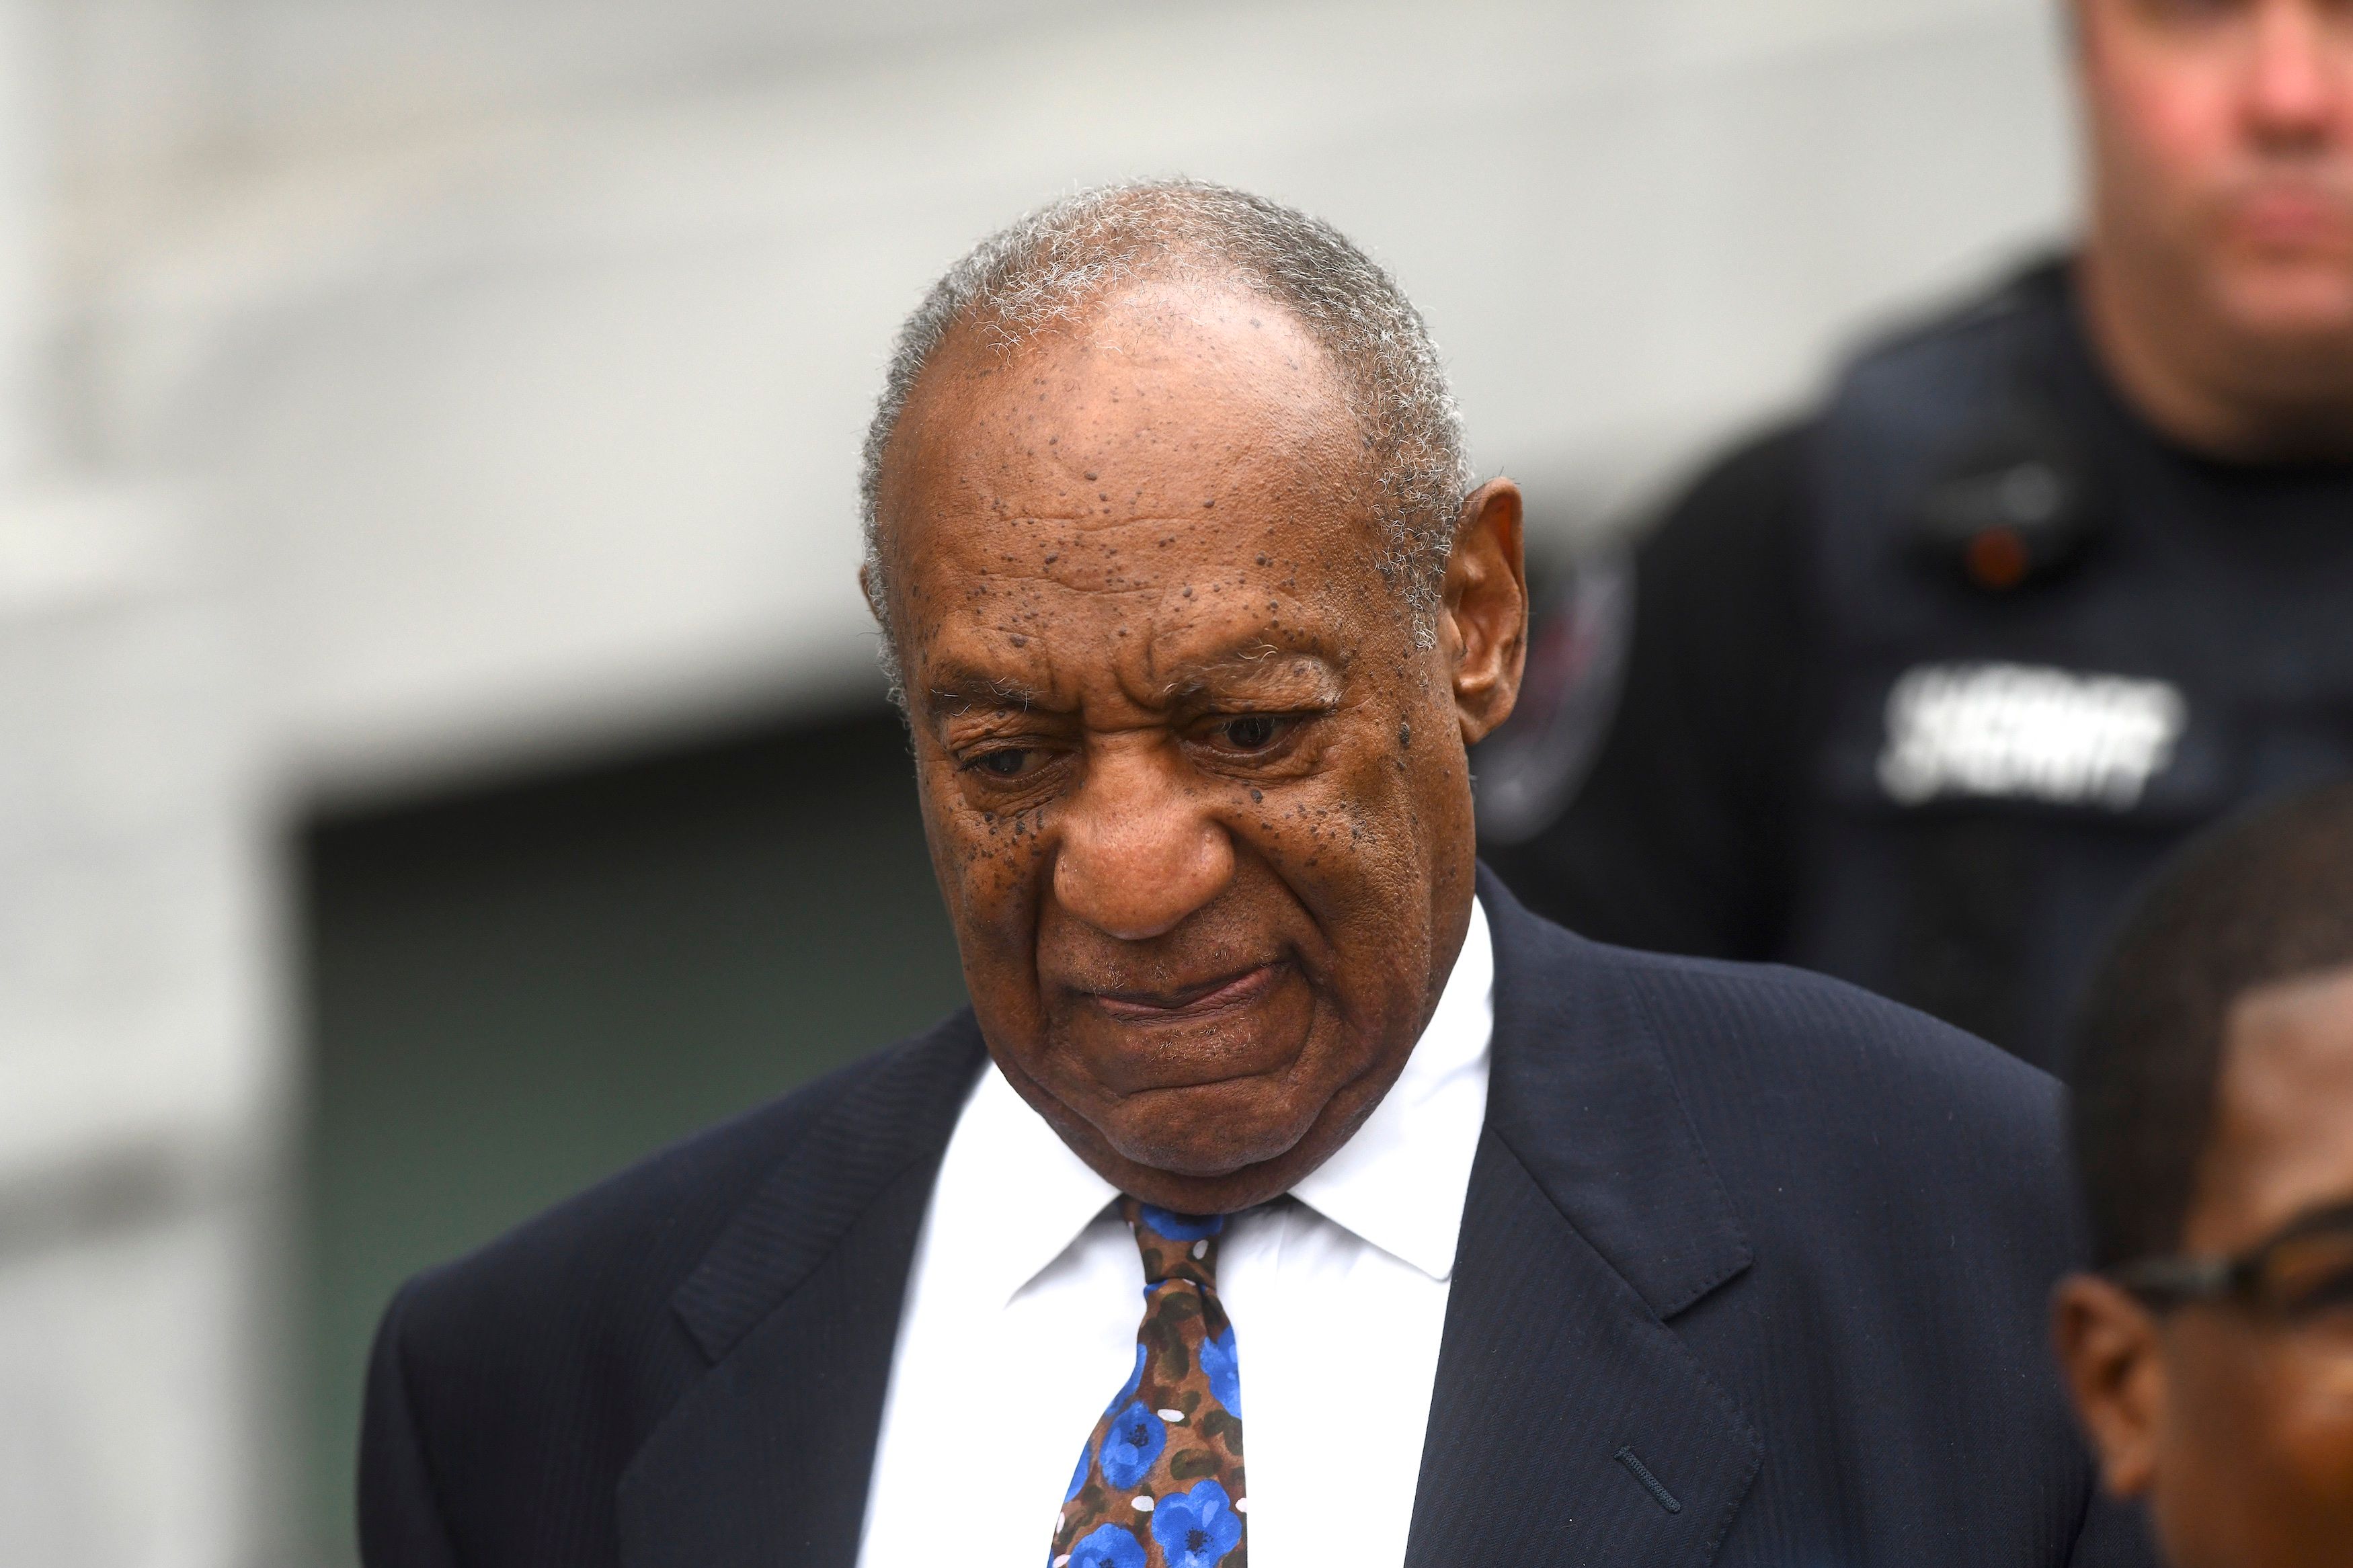 Comedian Bill Cosby walks free after being released from prison.